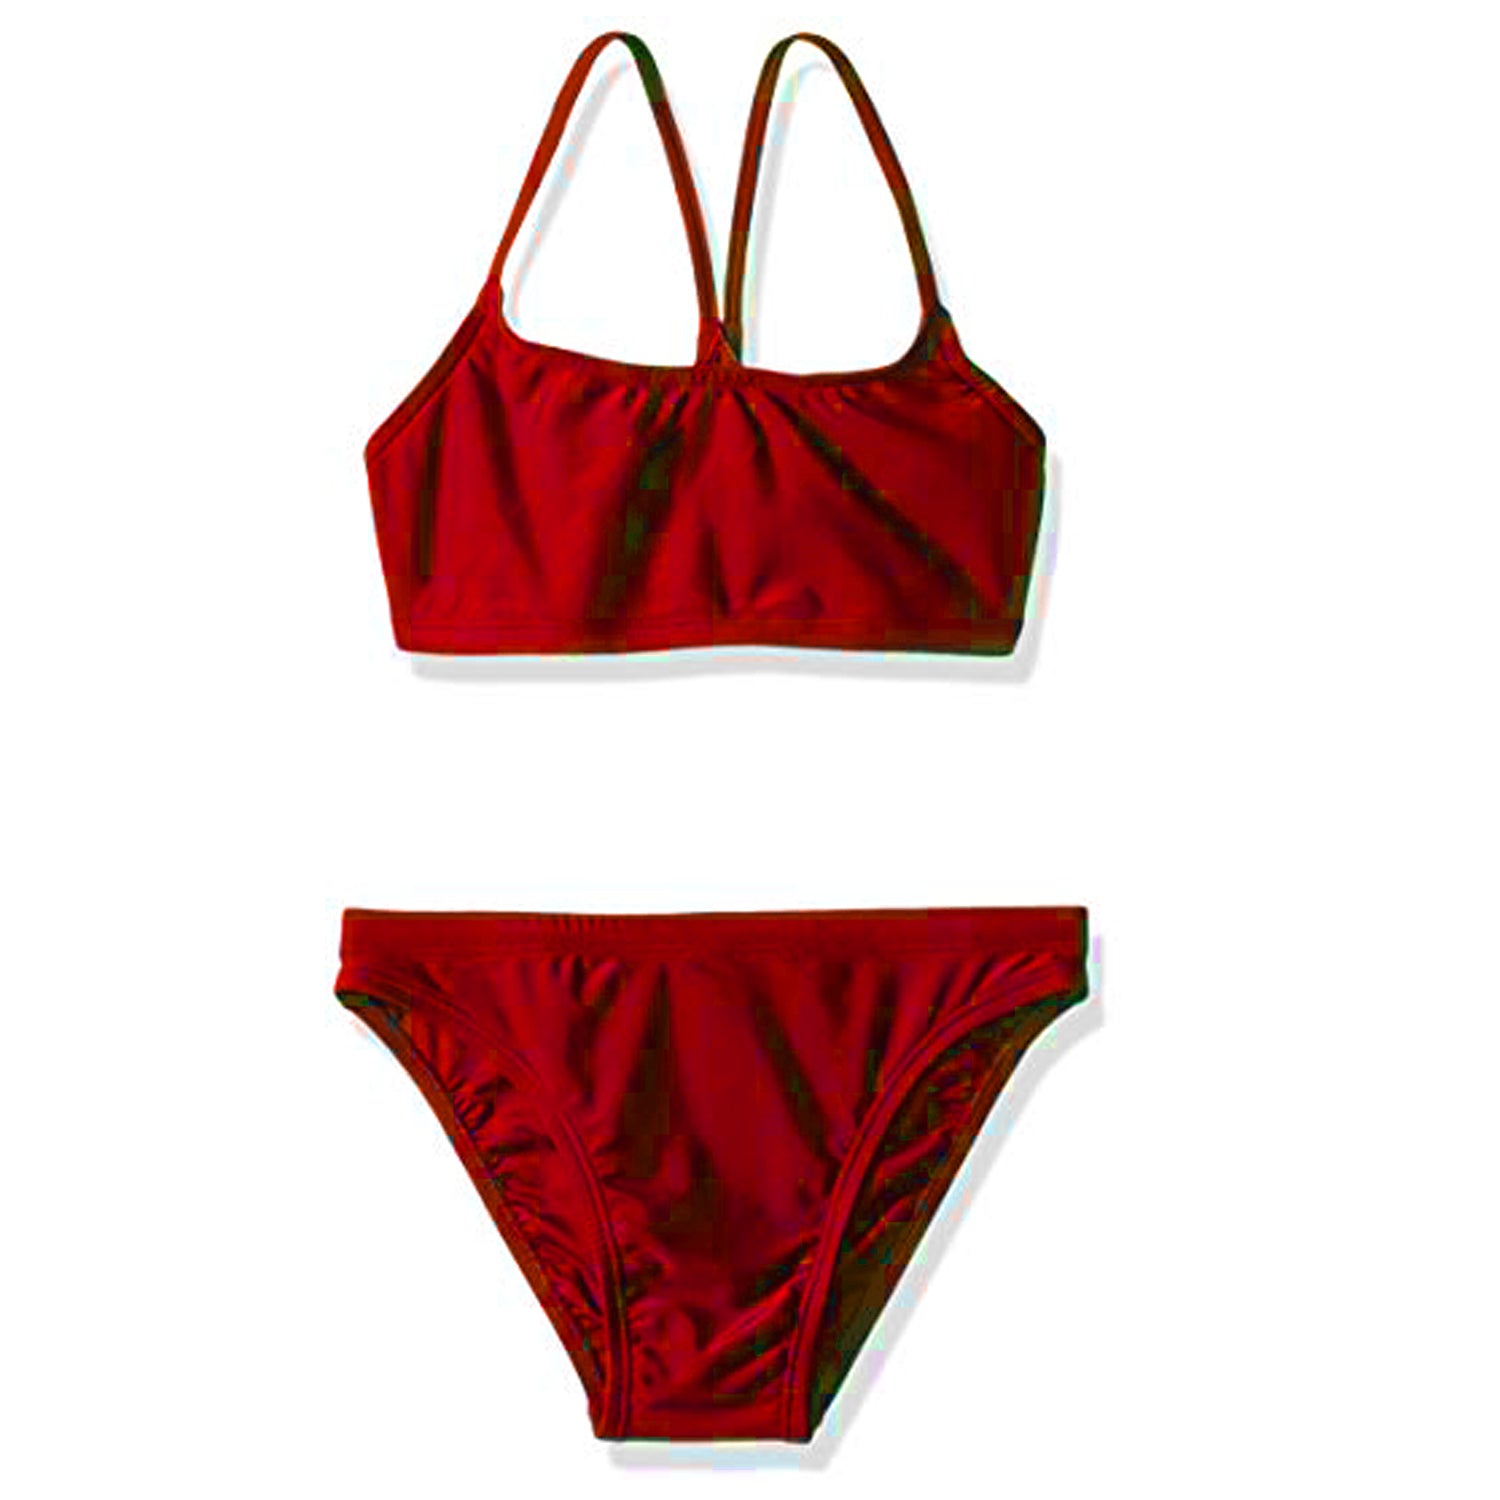 Girls & Women's Junior Guard Two Piece Swimsuit Multi Sizing Options -Red  (Sizes 20-36) –